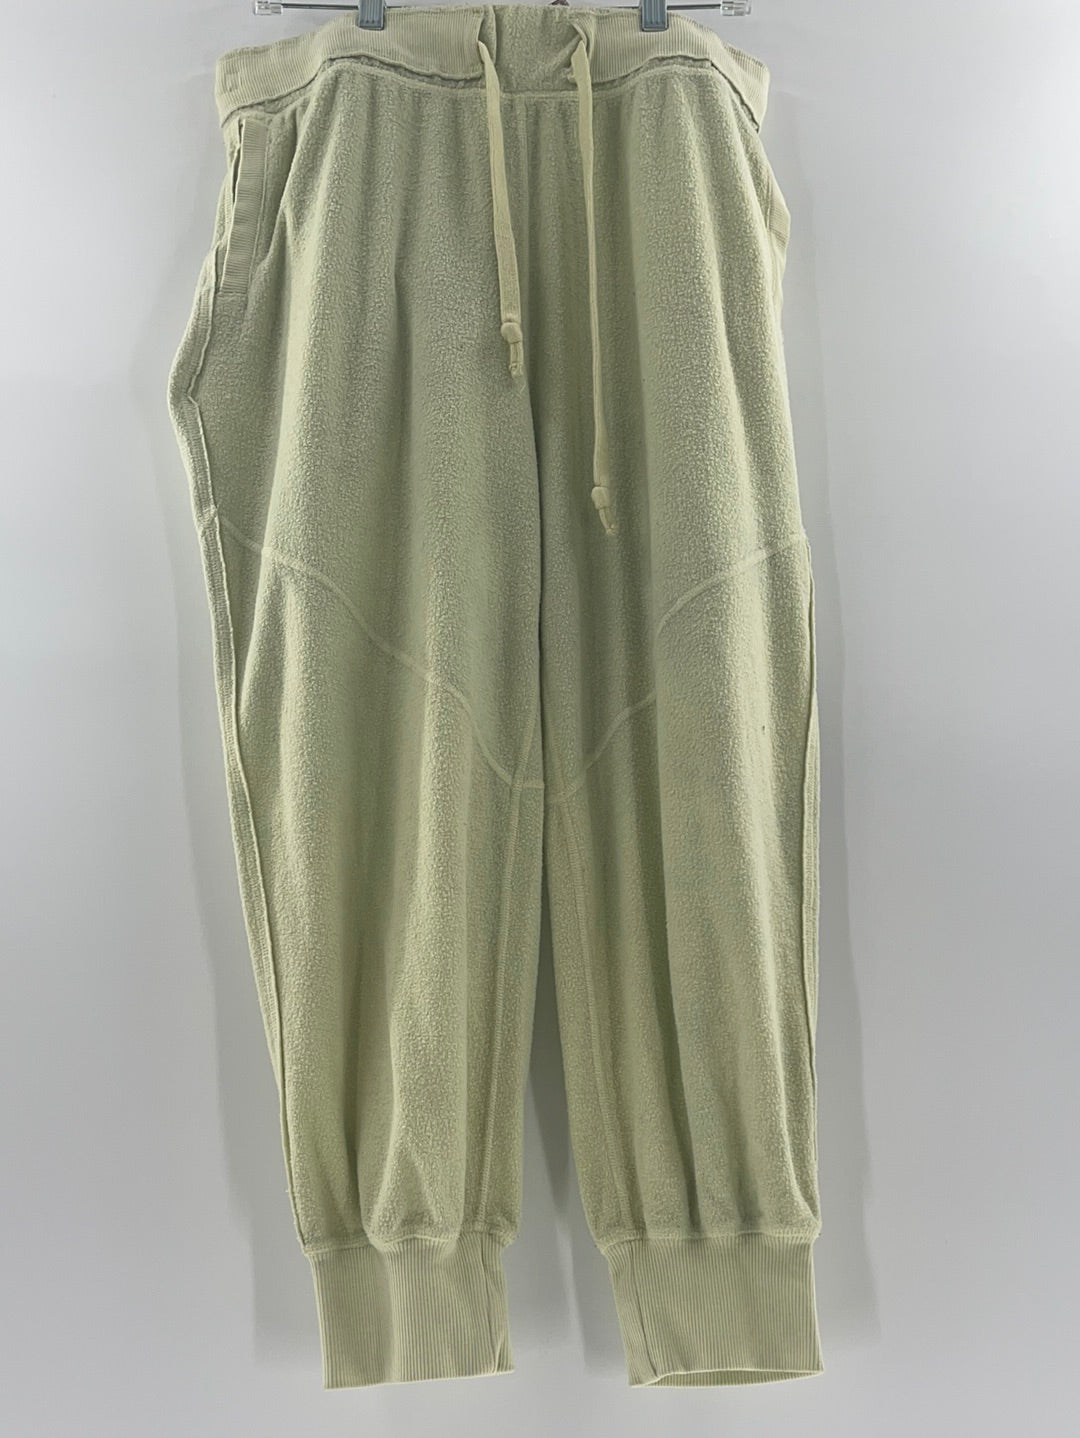 Free People Movement Gym Pants (Pastel Green Color)